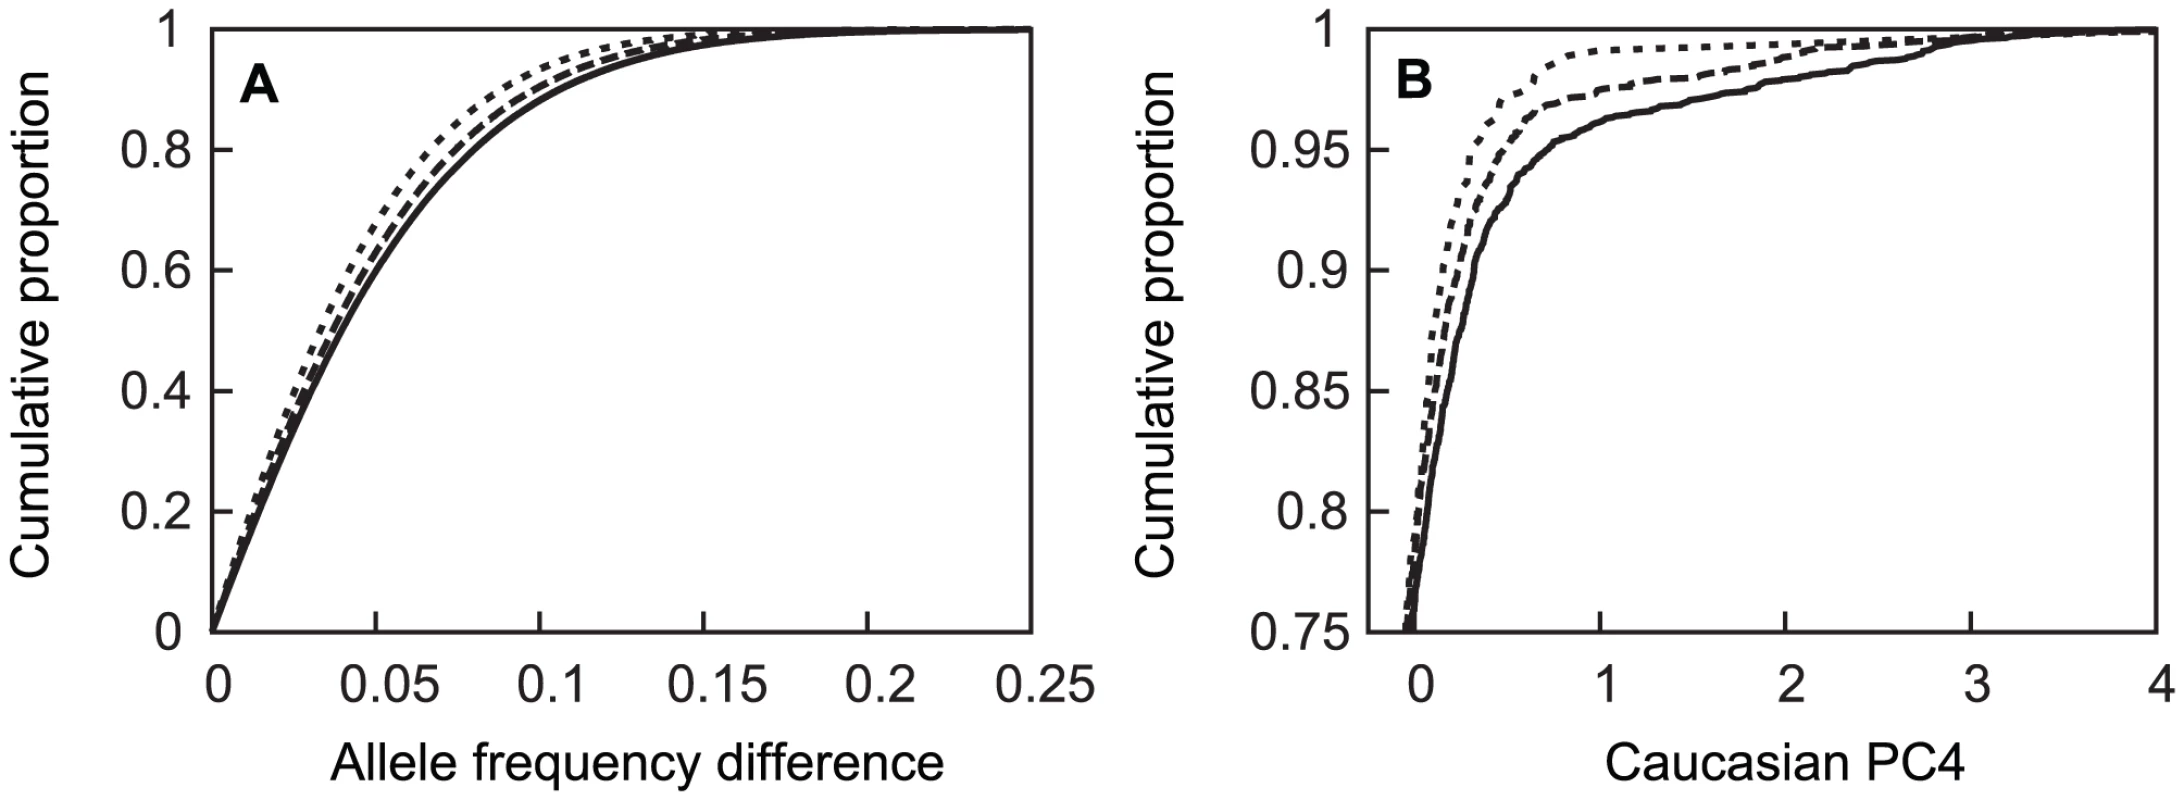 Cumulative distribution of absolute value of allele frequency differences between subpopulations and <i>APOE</i> genotypes.